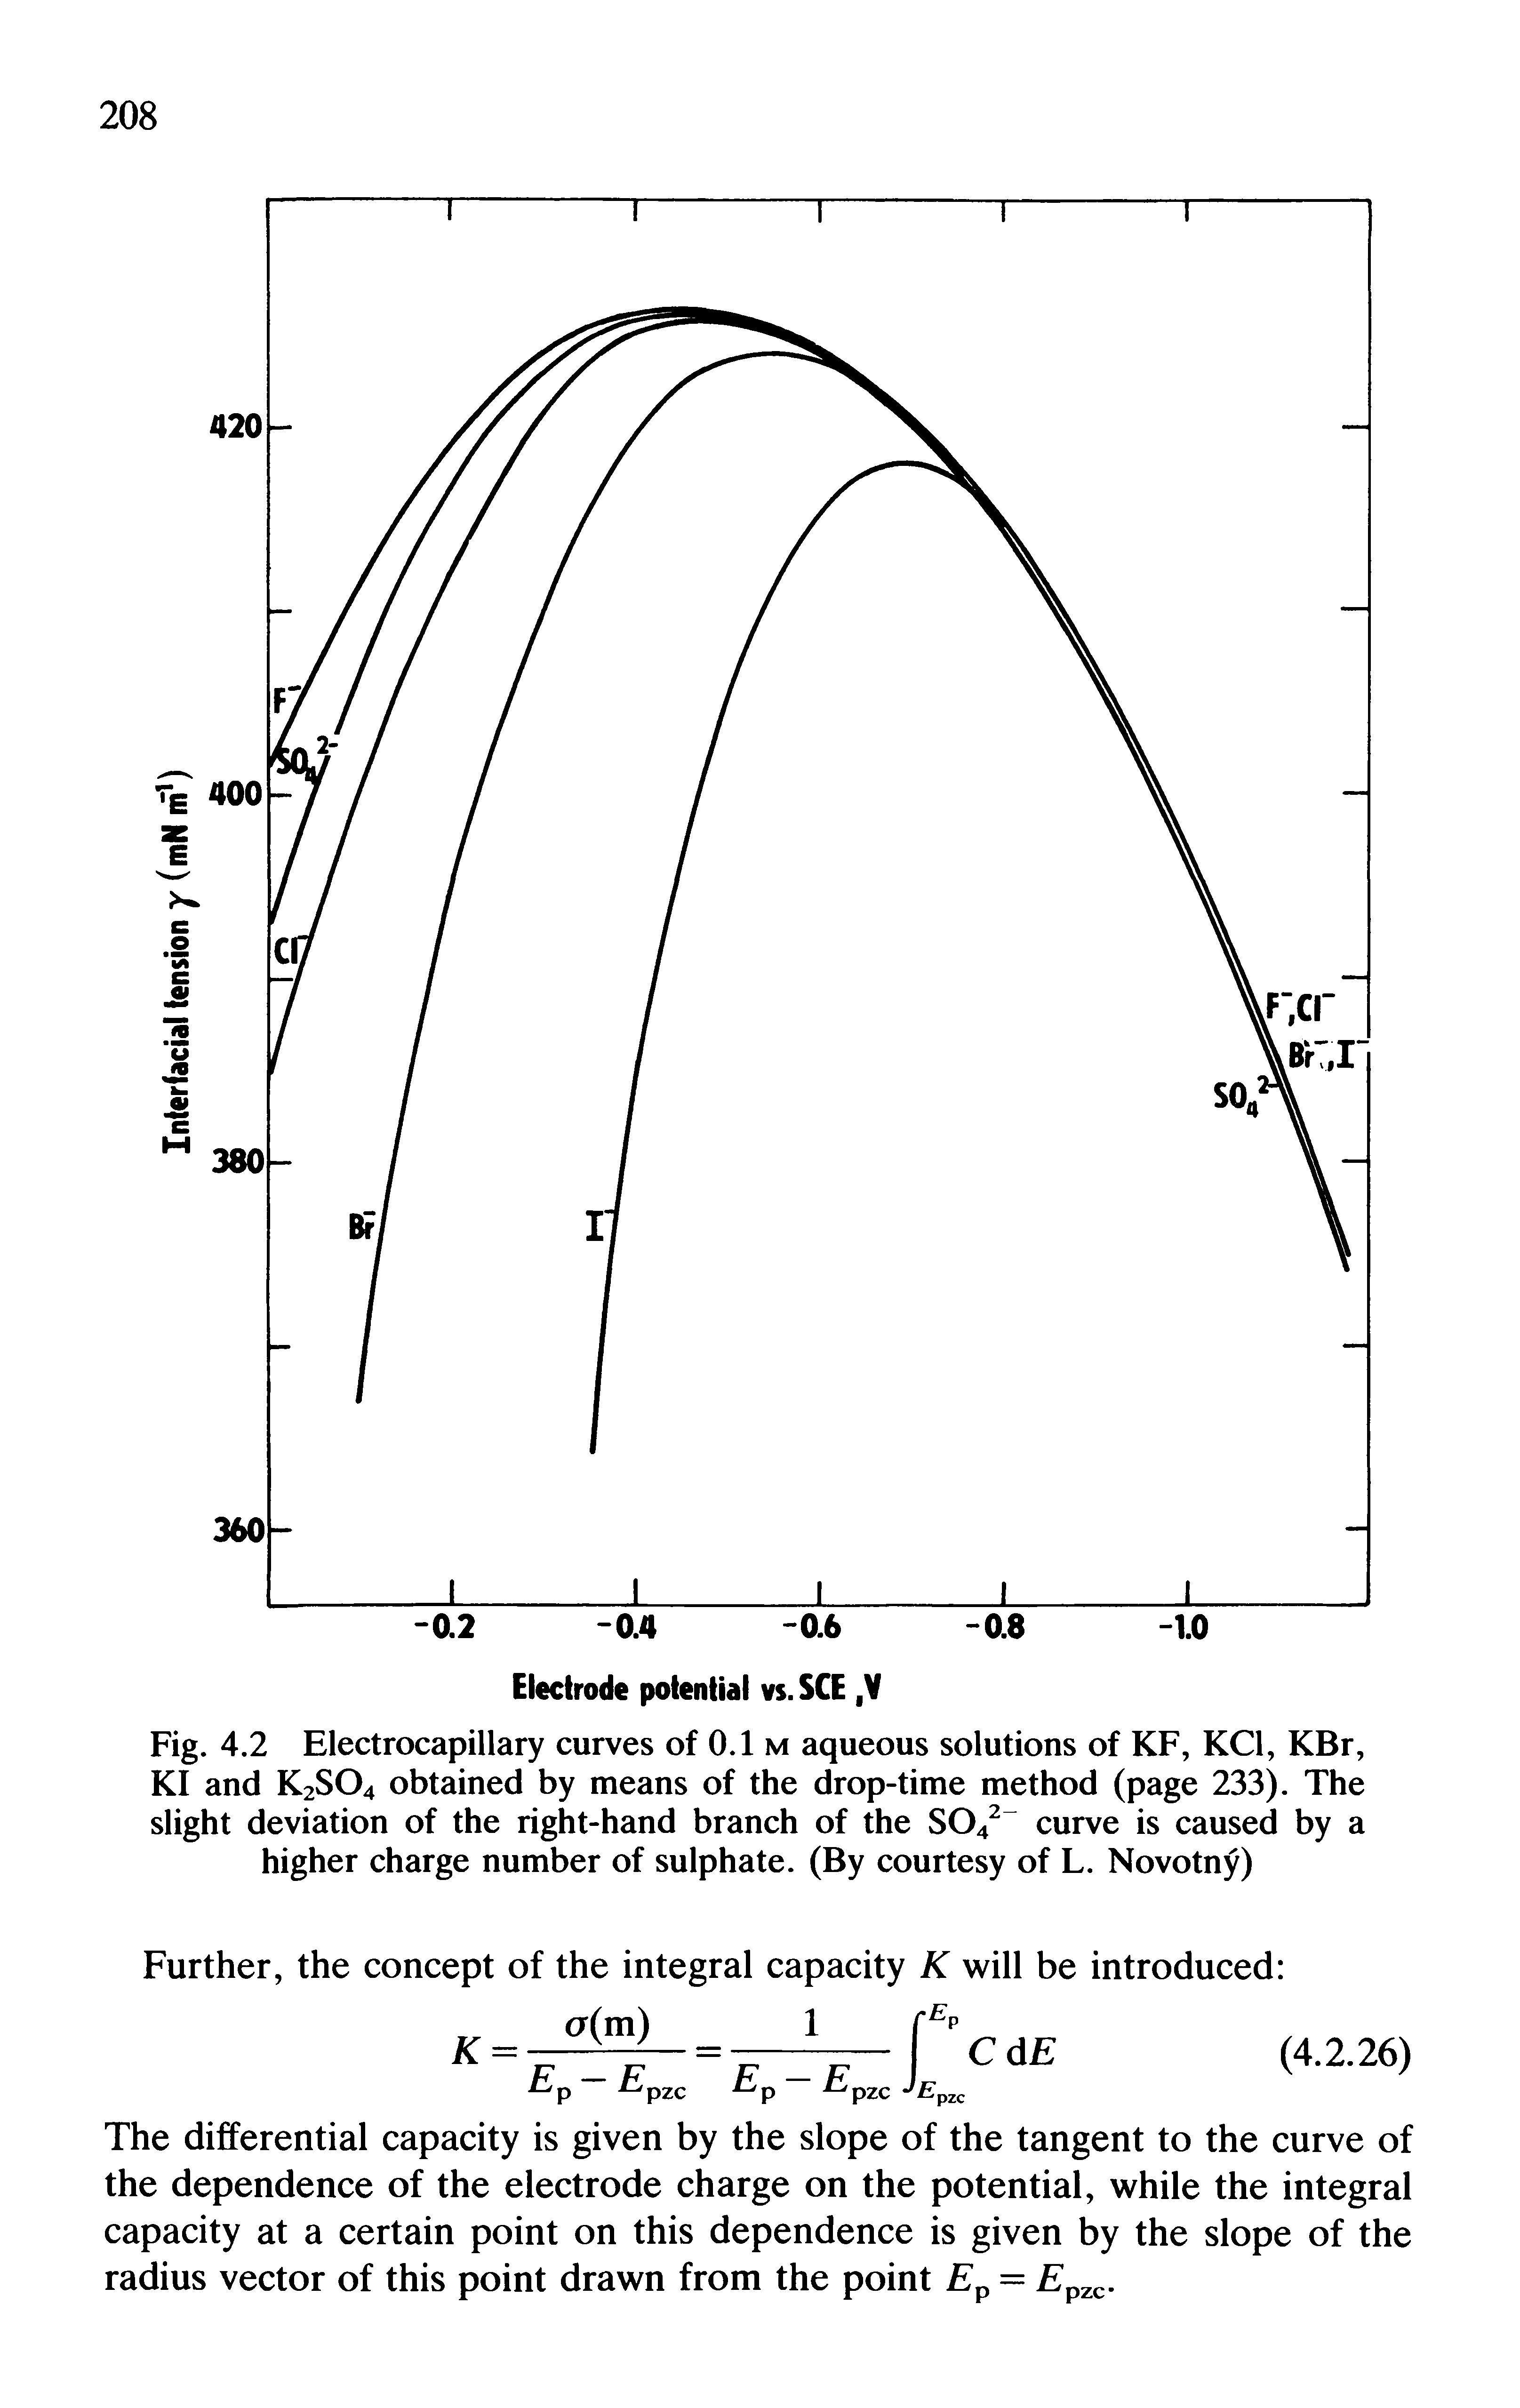 Fig. 4.2 Electrocapillary curves of 0.1 m aqueous solutions of KF, KC1, KBr, KI and K2S04 obtained by means of the drop-time method (page 233). The slight deviation of the right-hand branch of the S042- curve is caused by a higher charge number of sulphate. (By courtesy of L. Novotny)...